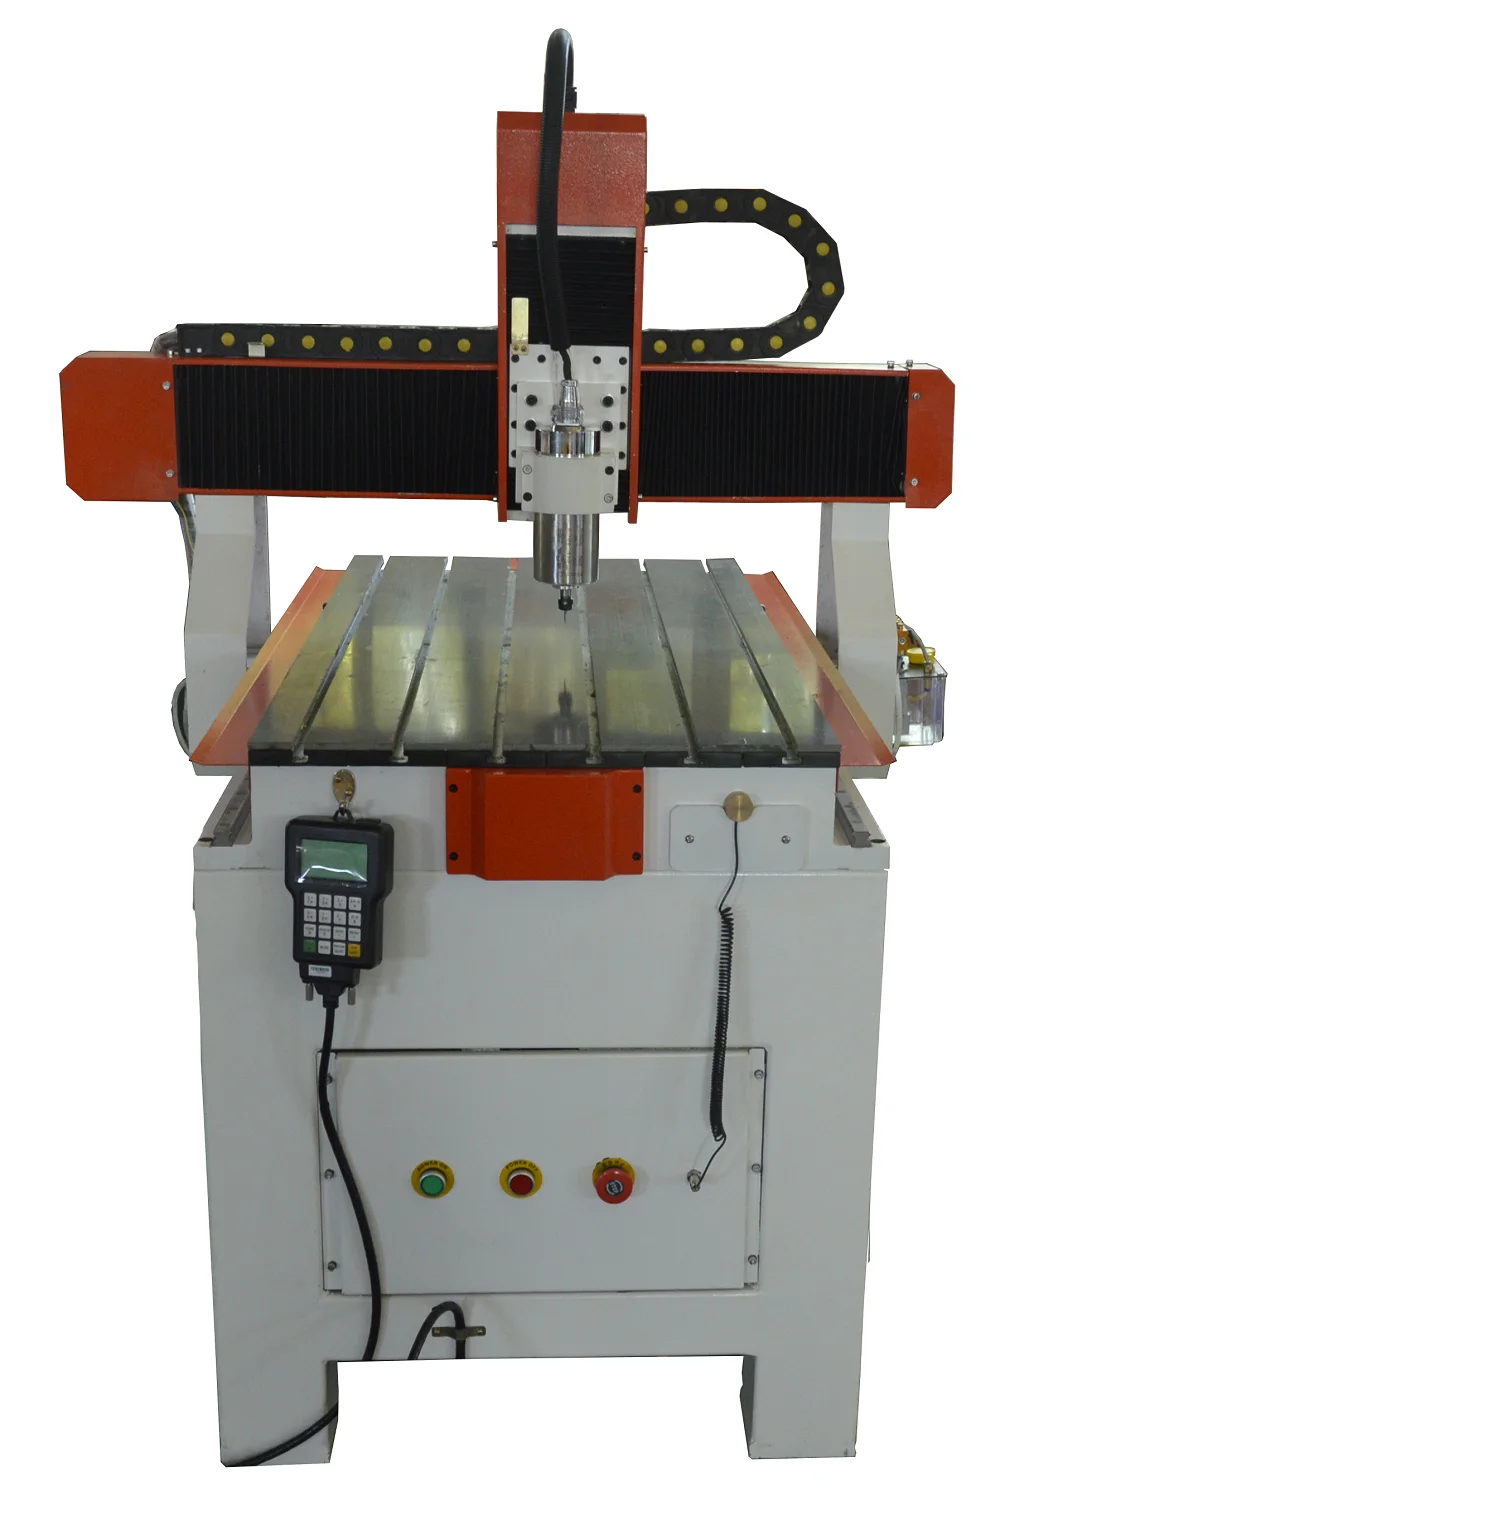 Hot Sale Mini Wood Carving Machine Cnc Router 6090 Buy Cost Effective 4 Axis Small Cnc Wood Cutting Machine Mini Cnc 5 Axis High Speed Mini 4040 Cnc Wood Carving Router For Wood